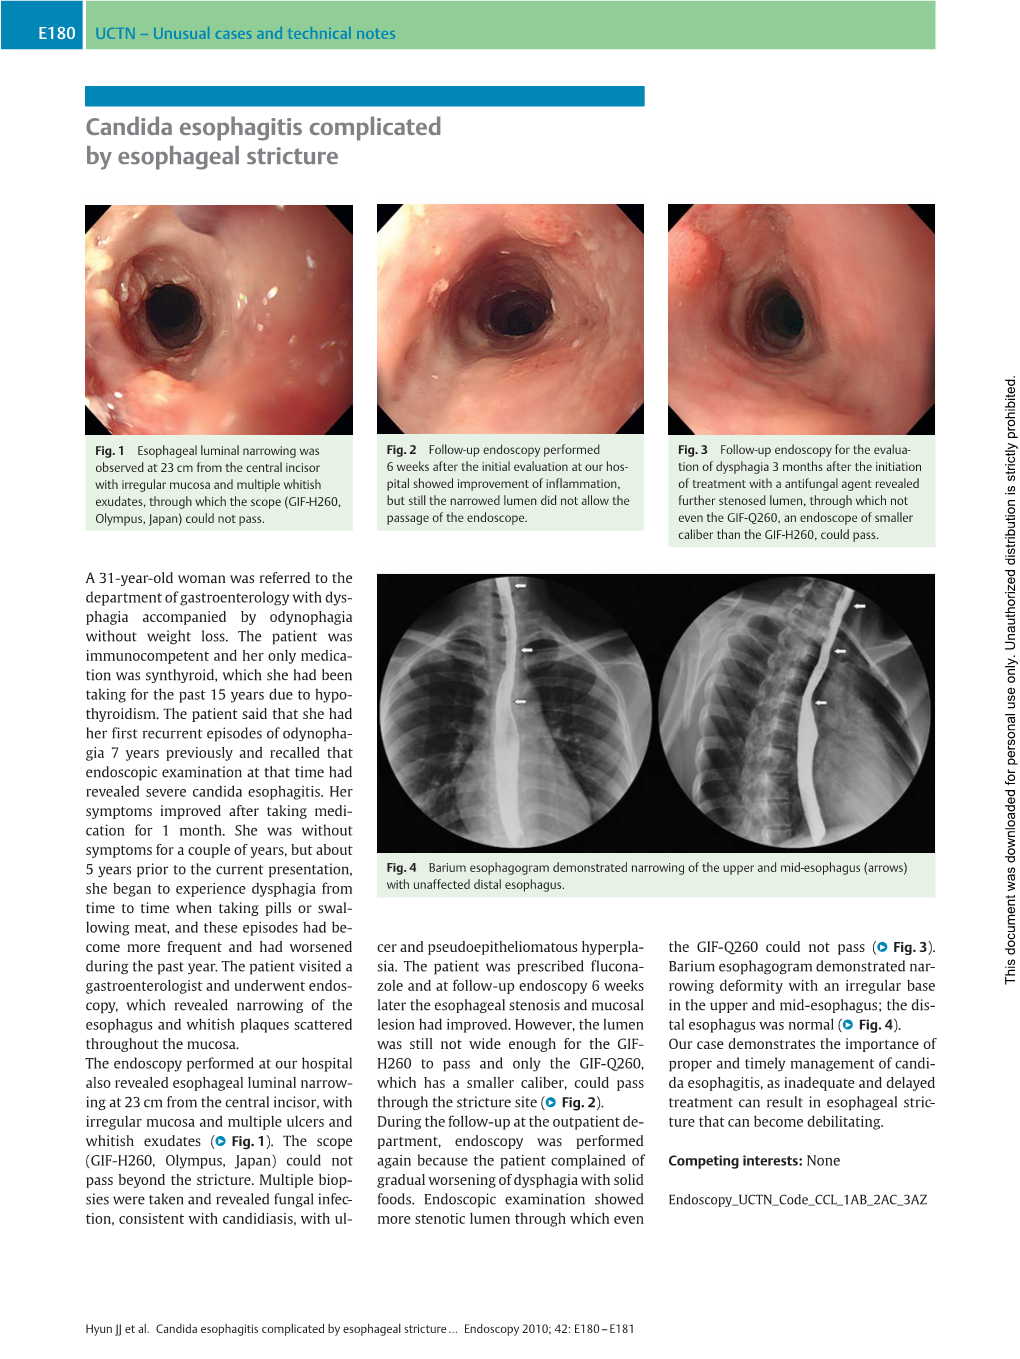 Candida Esophagitis Complicated by Esophageal Stricture